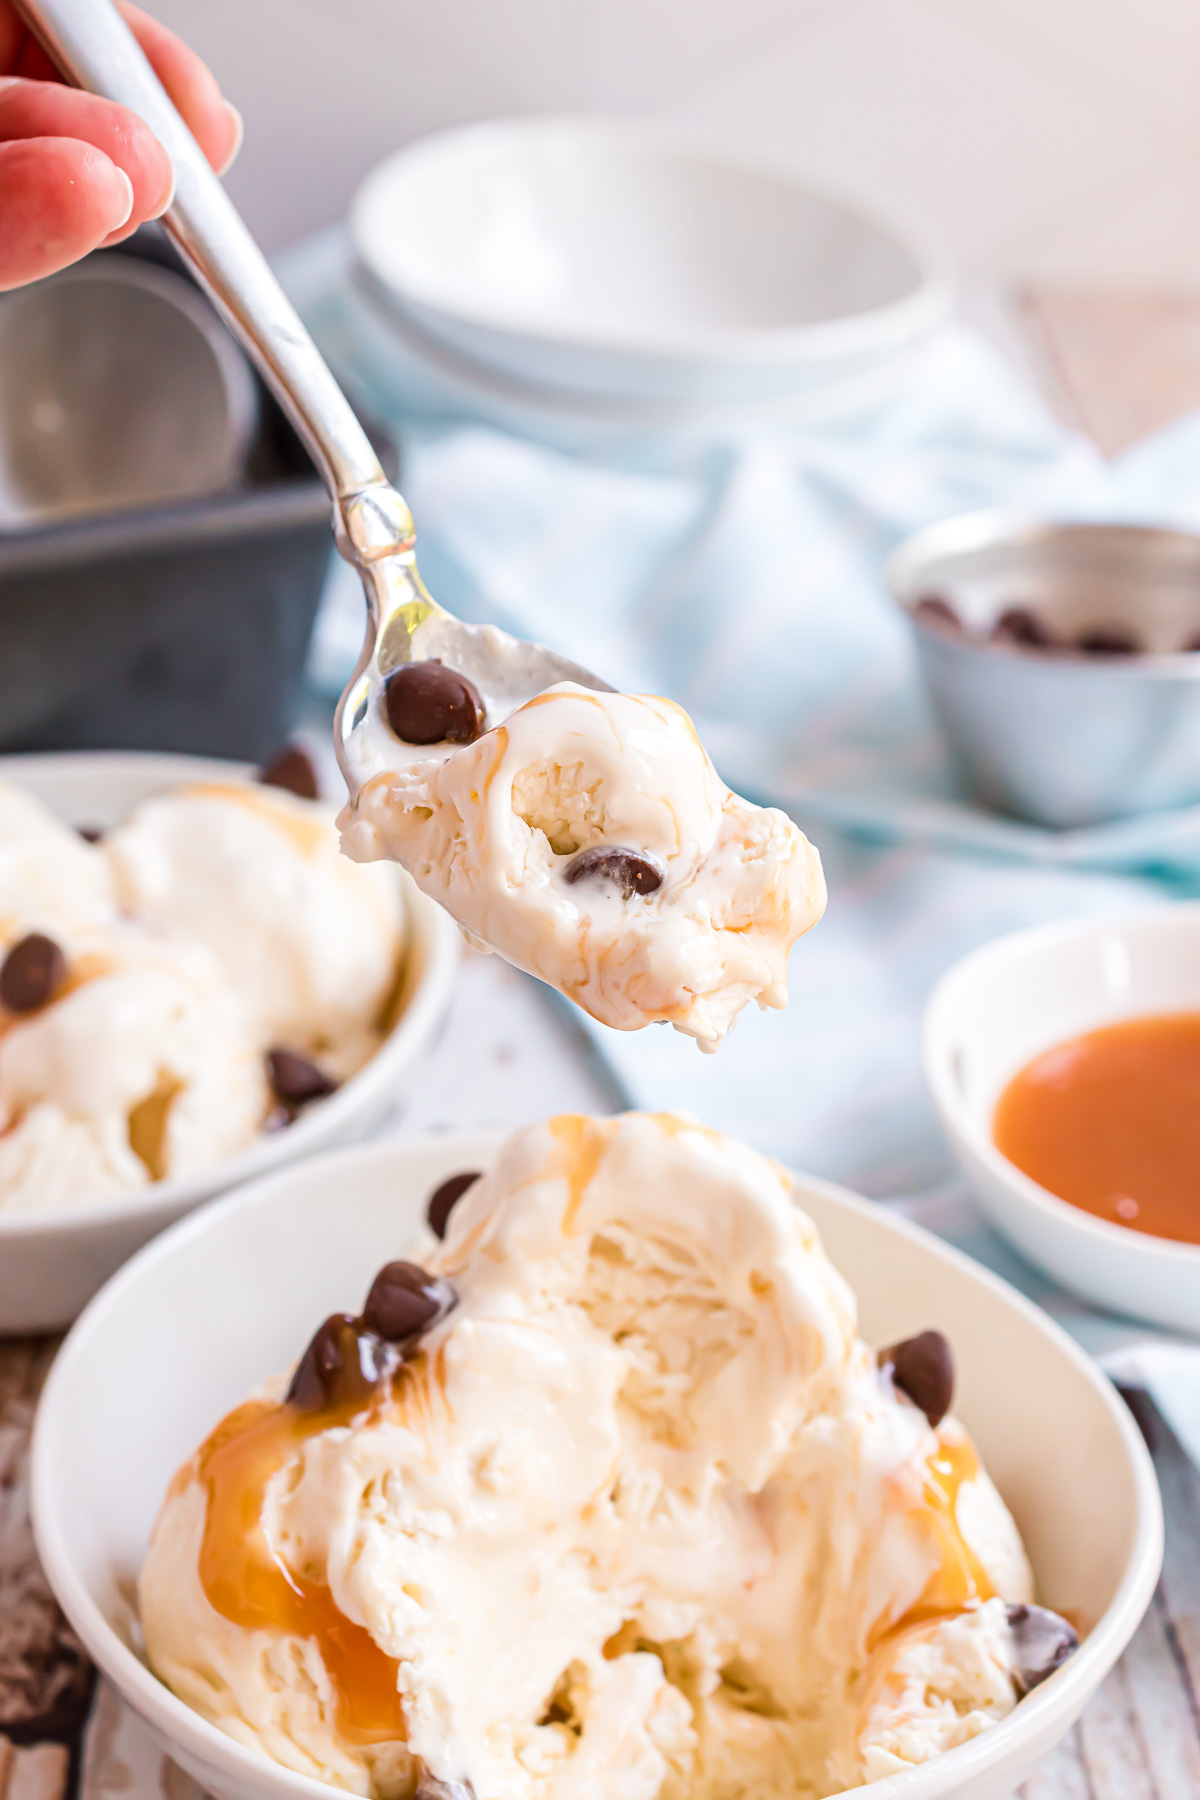 A spoonful of no churn vanilla ice cream ready to be eaten with caramel sauce and chocolate chips peeking out from the mixture.